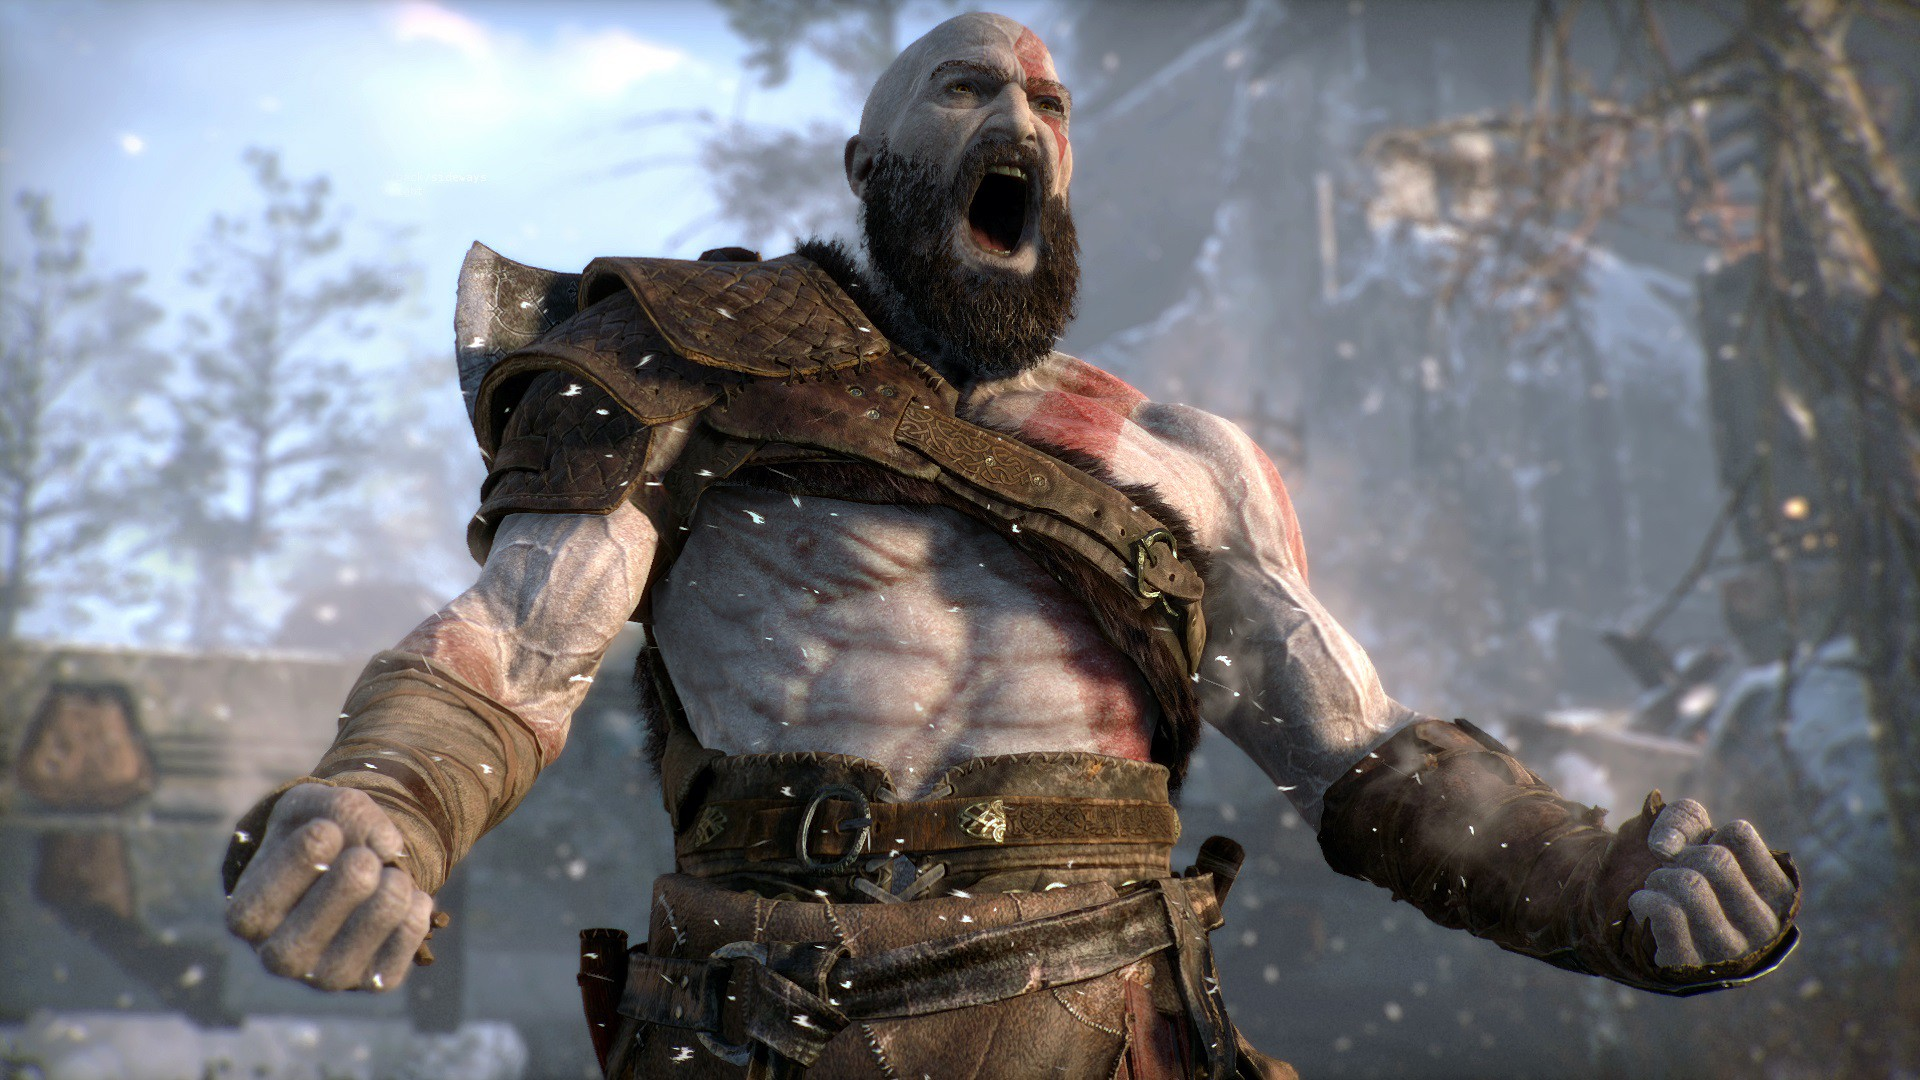 Kratos standing in a power pose looks like he is yelling a battle cry